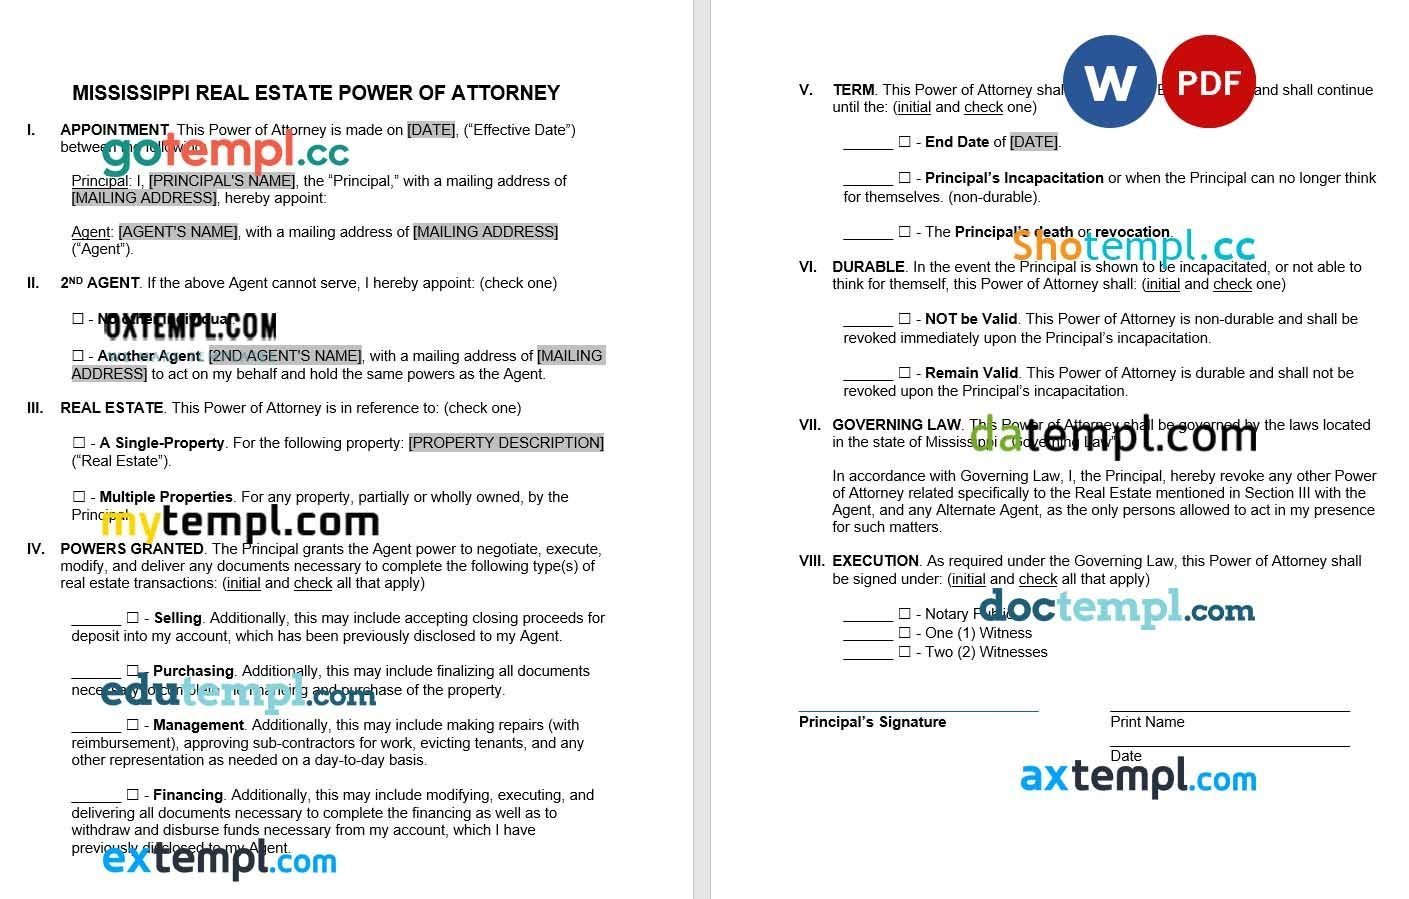 Mississippi Real Estate Power of Attorney Form example, fully editable